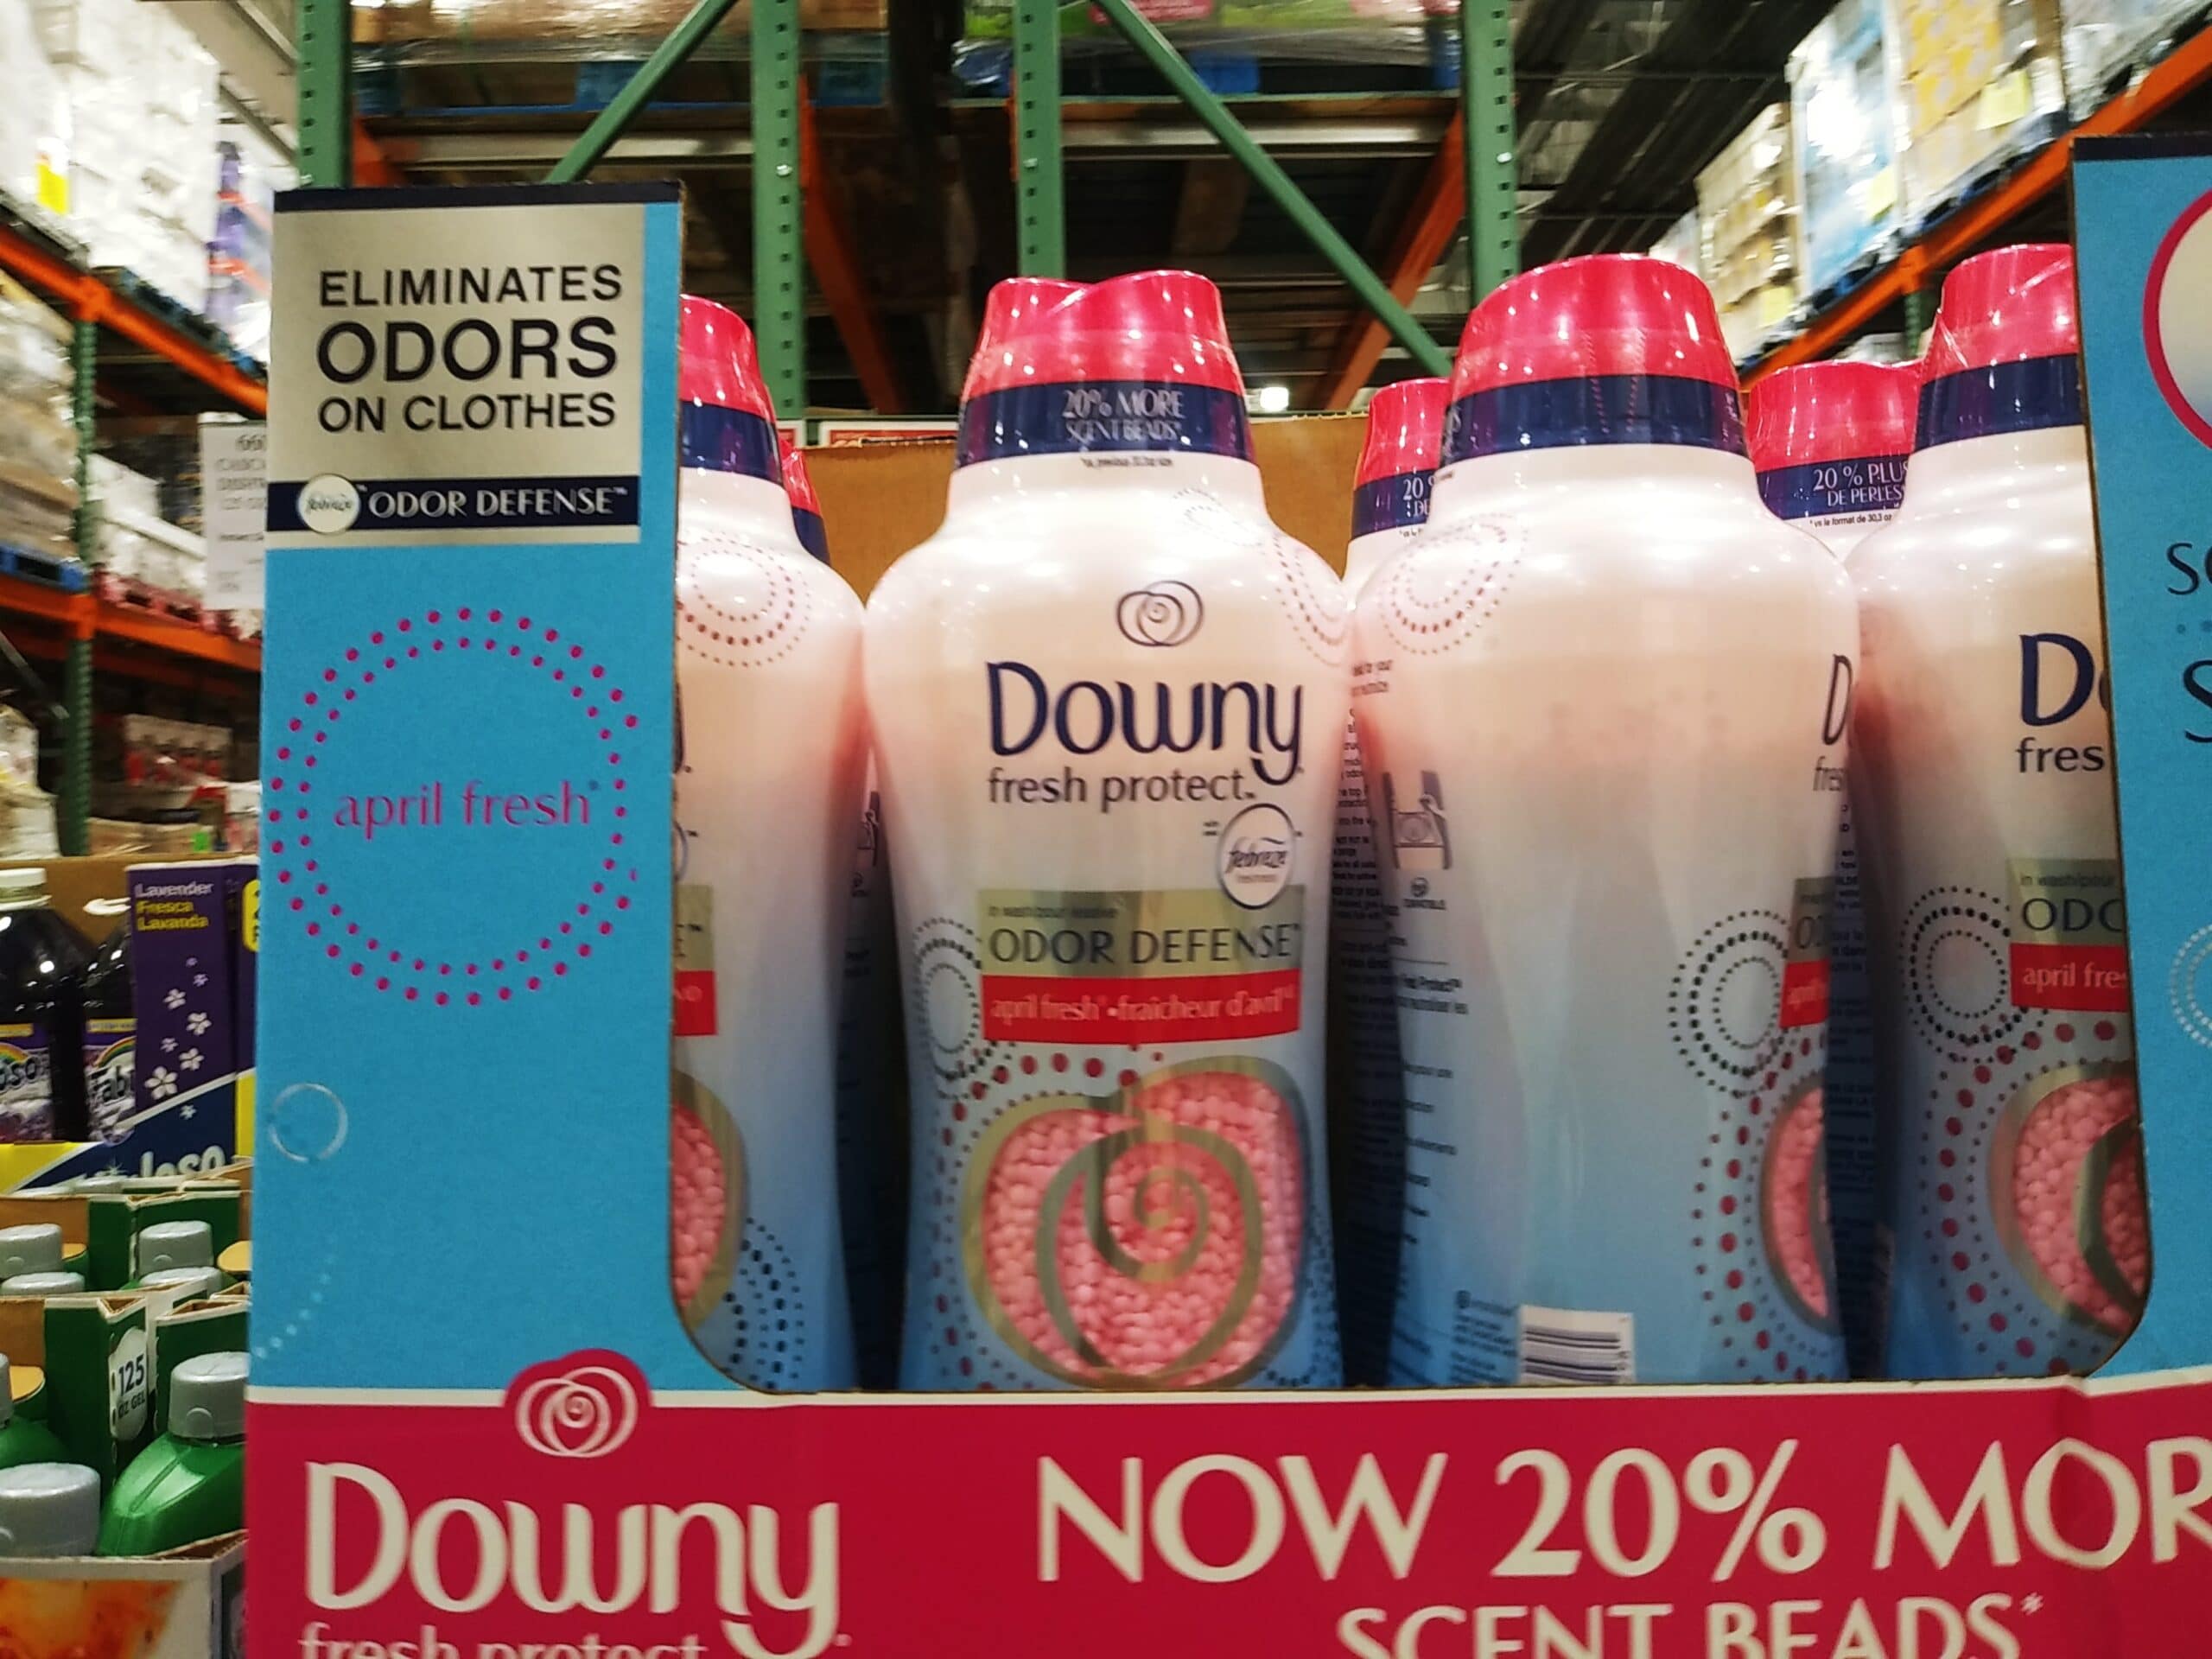 Triple Coupons To Use on Downy Scent Beads at BJs